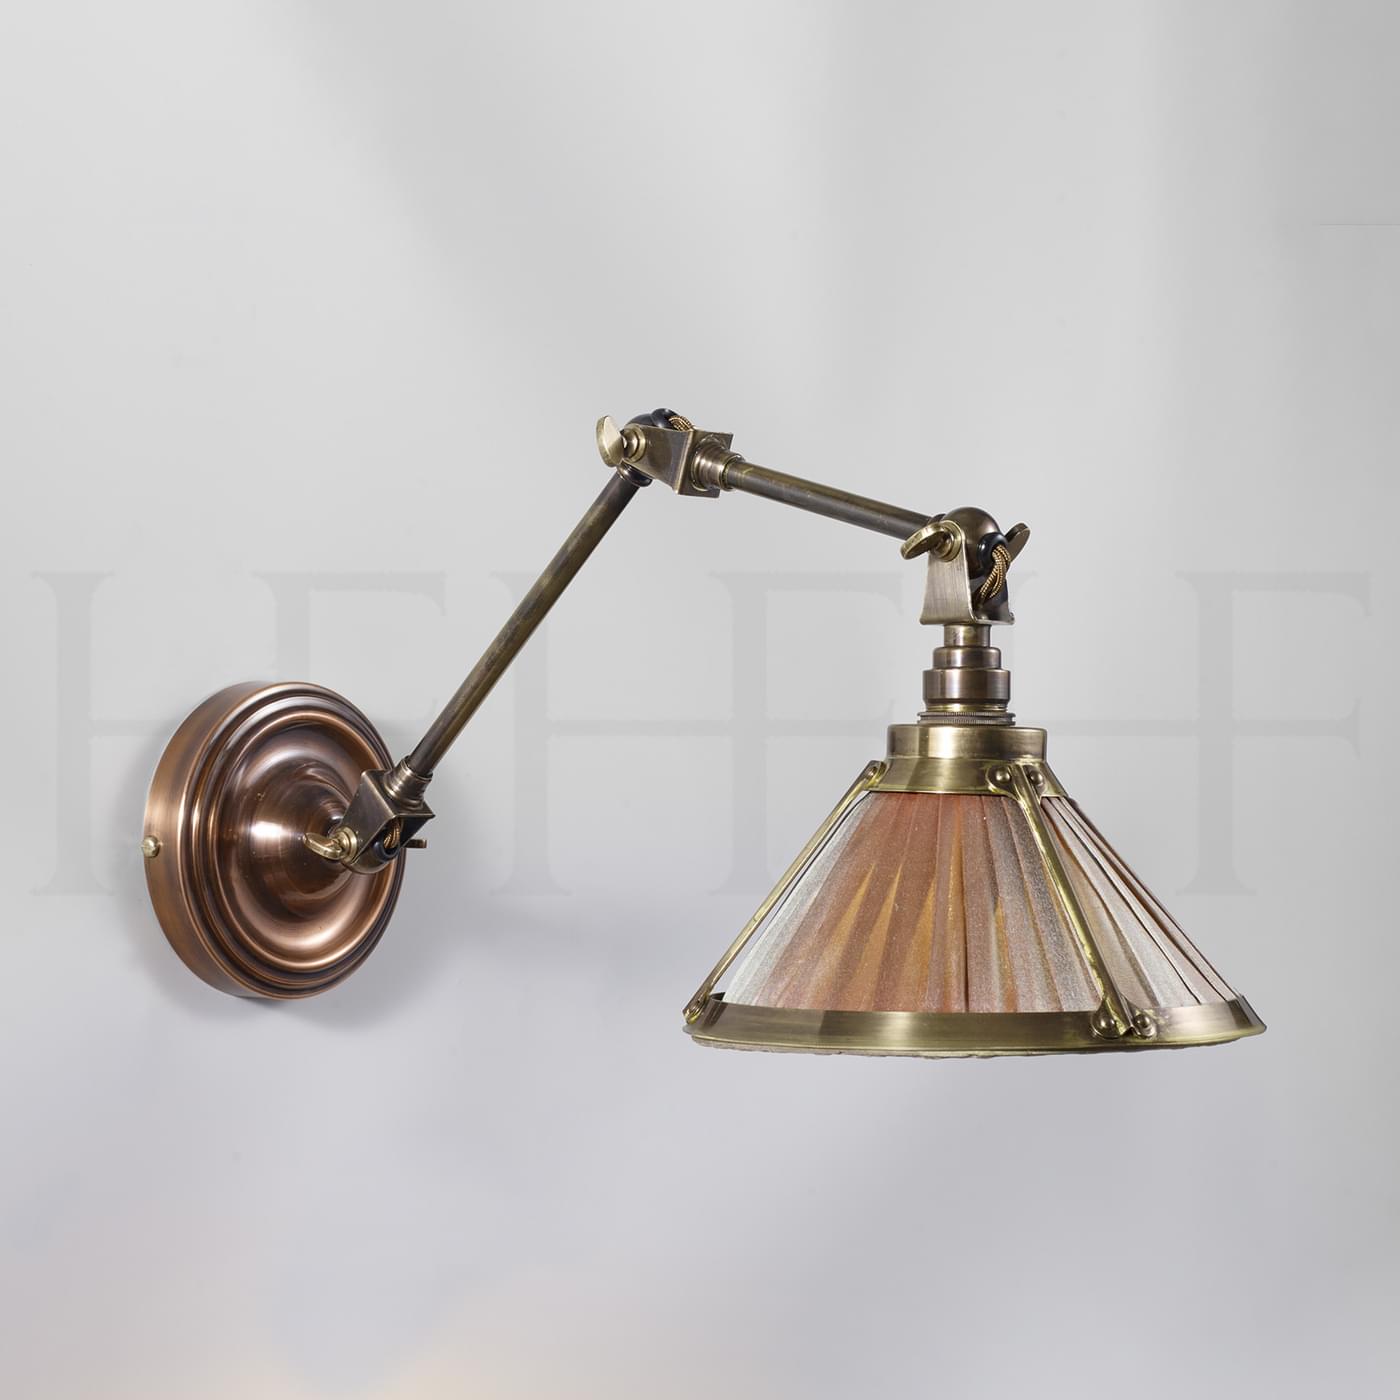 WL19 Venetia Double Arm Wall Light Antique Copper Antique Brass Thyme Shade L